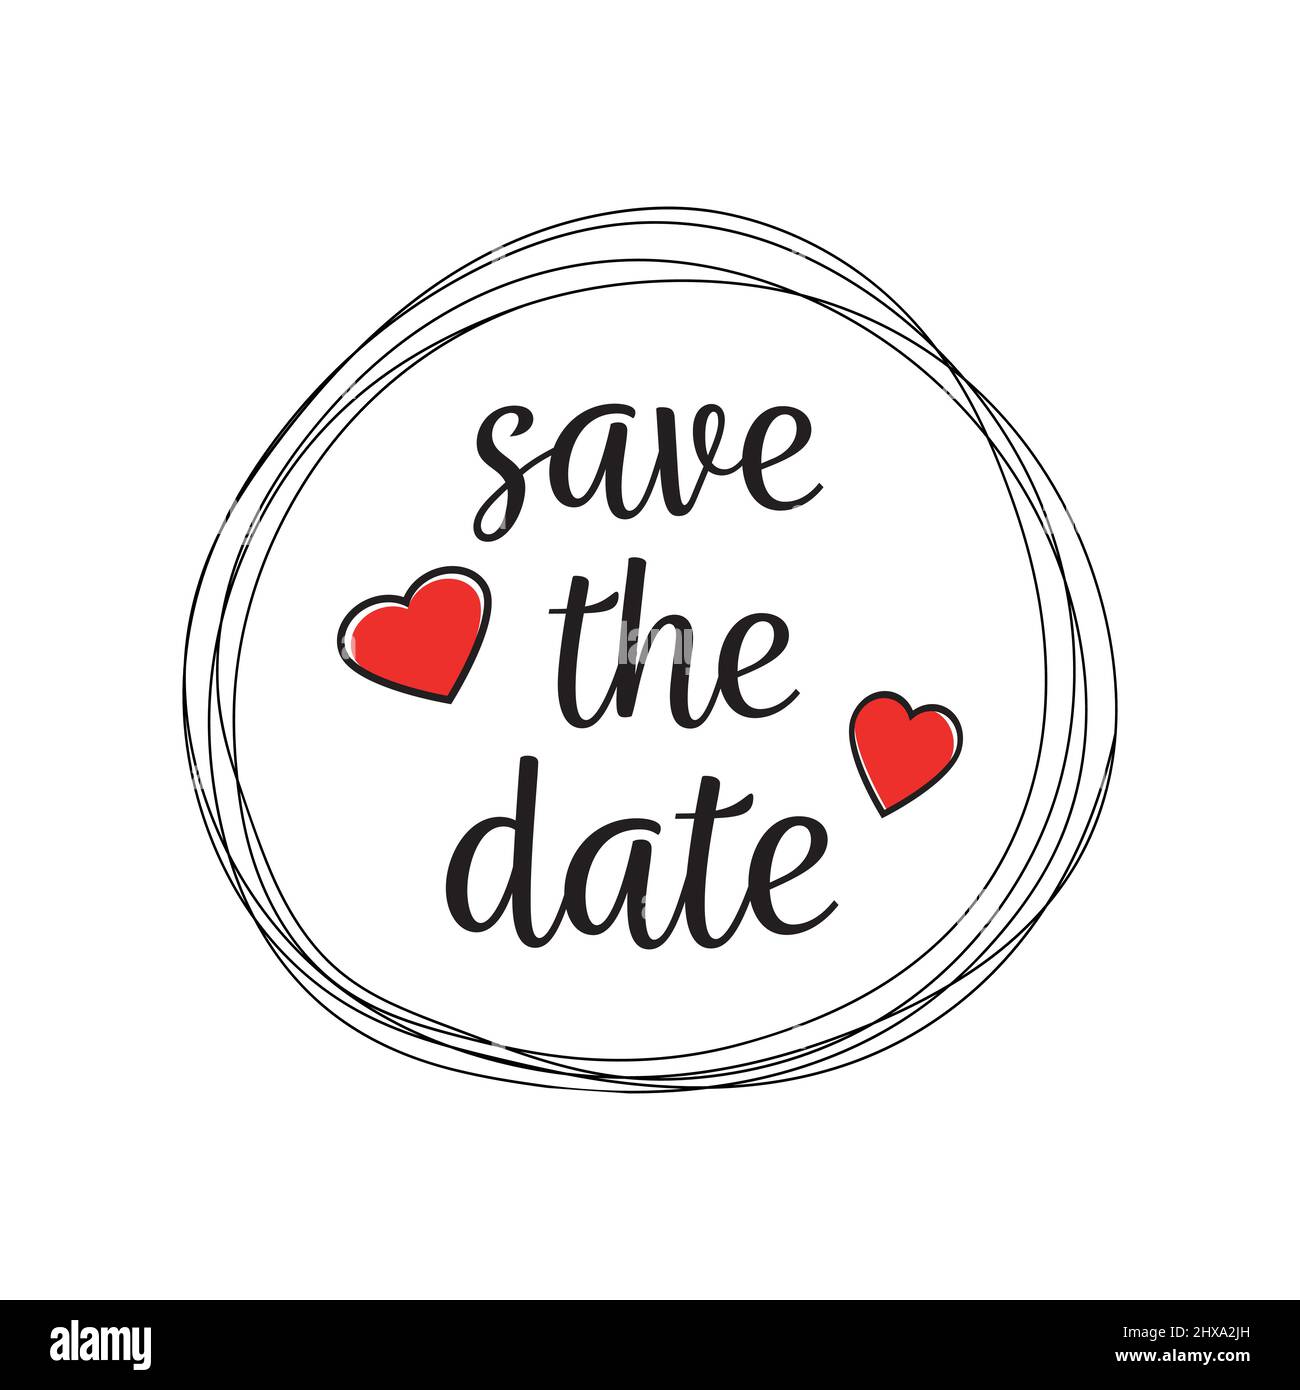 Save the date - Heart icons and text Stock Vector